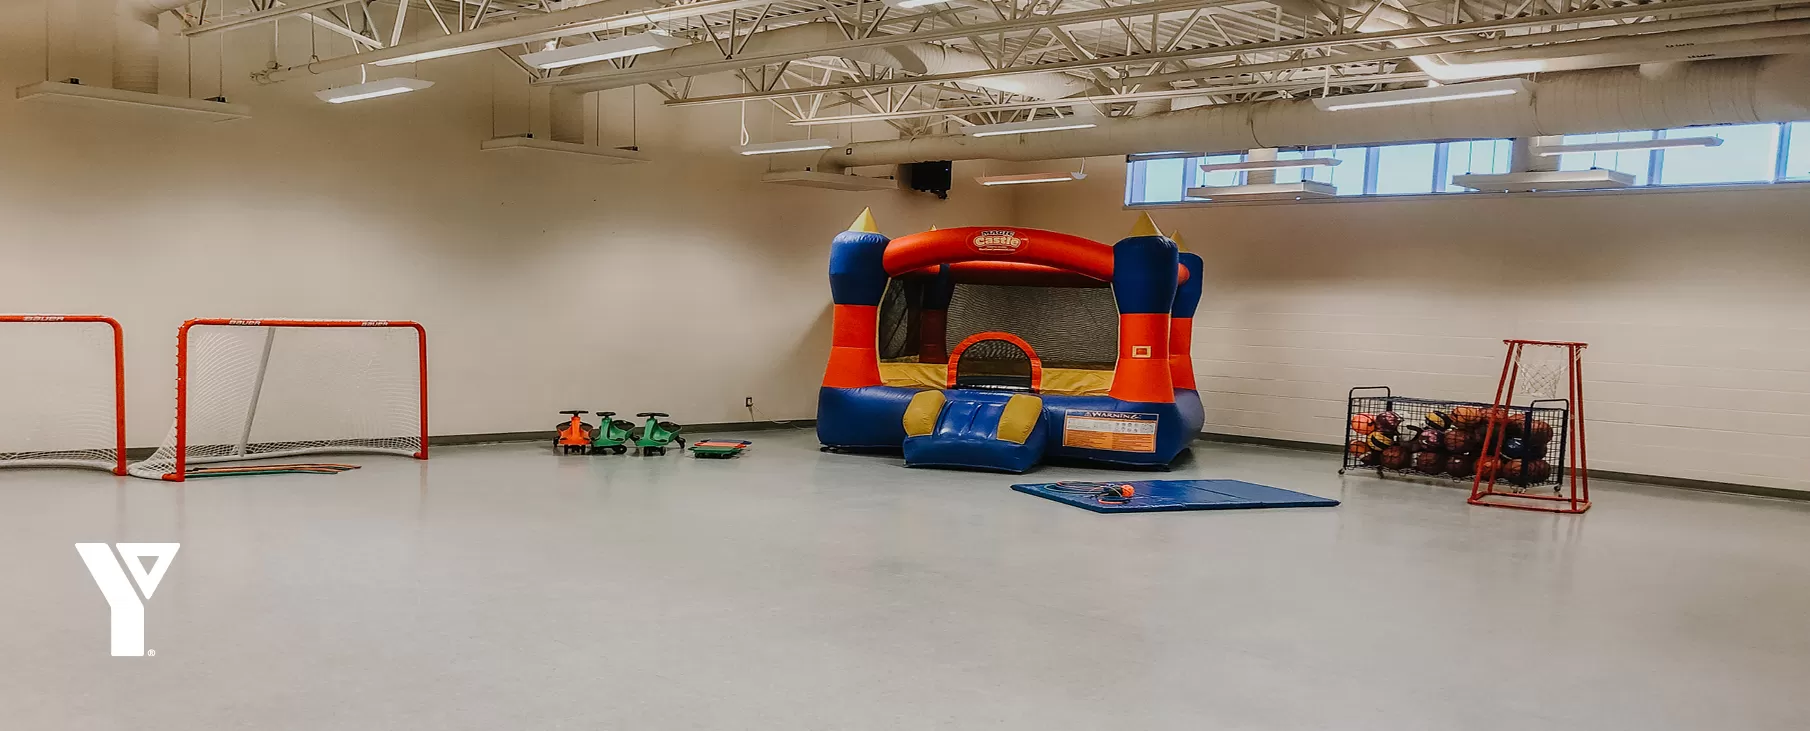 A large multipurpose room seen with hockey nets, basketballs and a medium-sized inflatable bouncy castle.